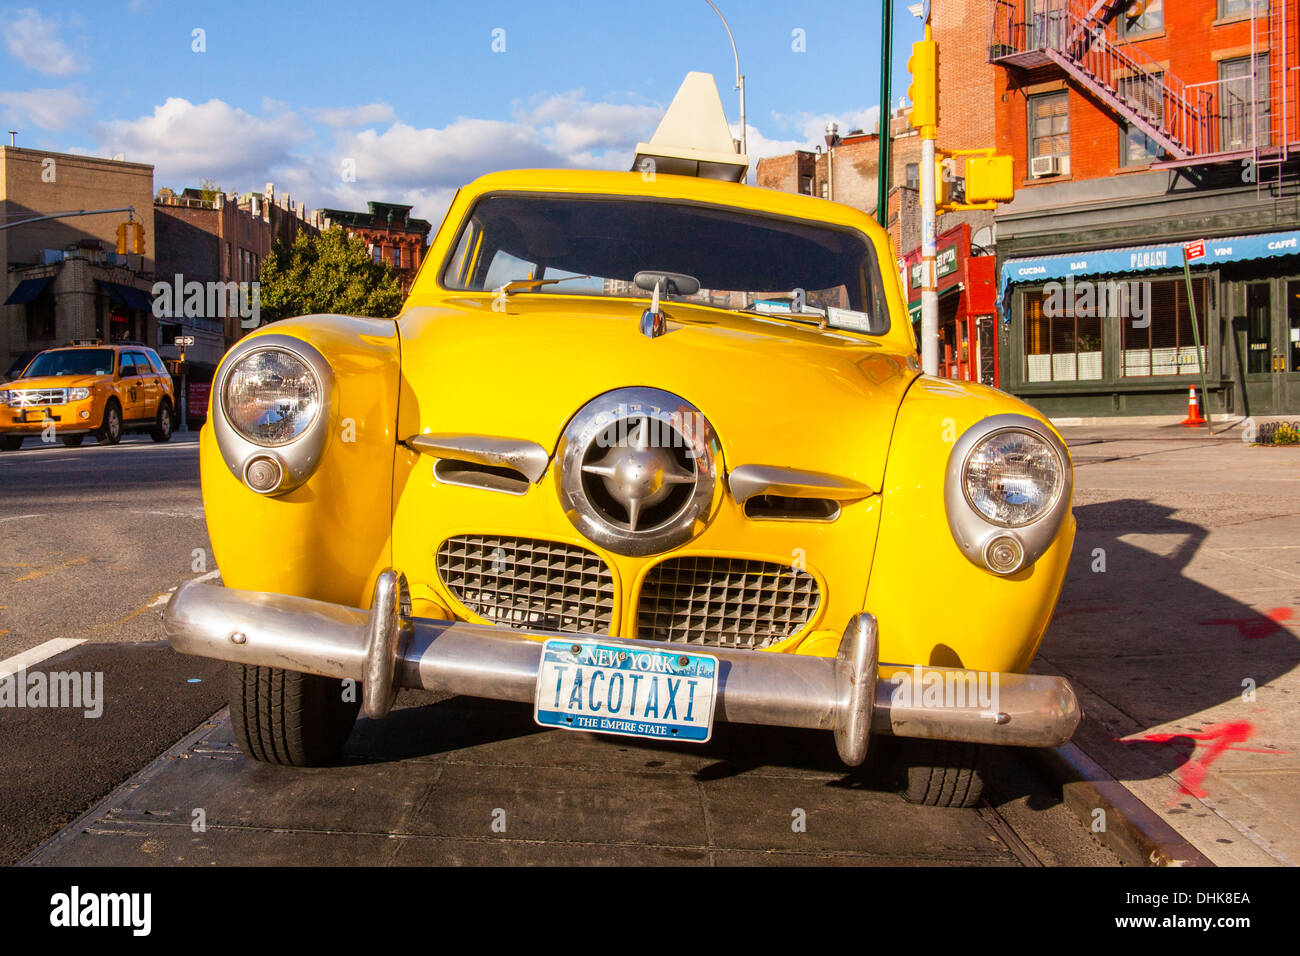 Vintage yellow taxi cab (1950's Studebaker) outside the Caliente Mexican restaurant, Greenwich Village, New York City, U.S.A Stock Photo